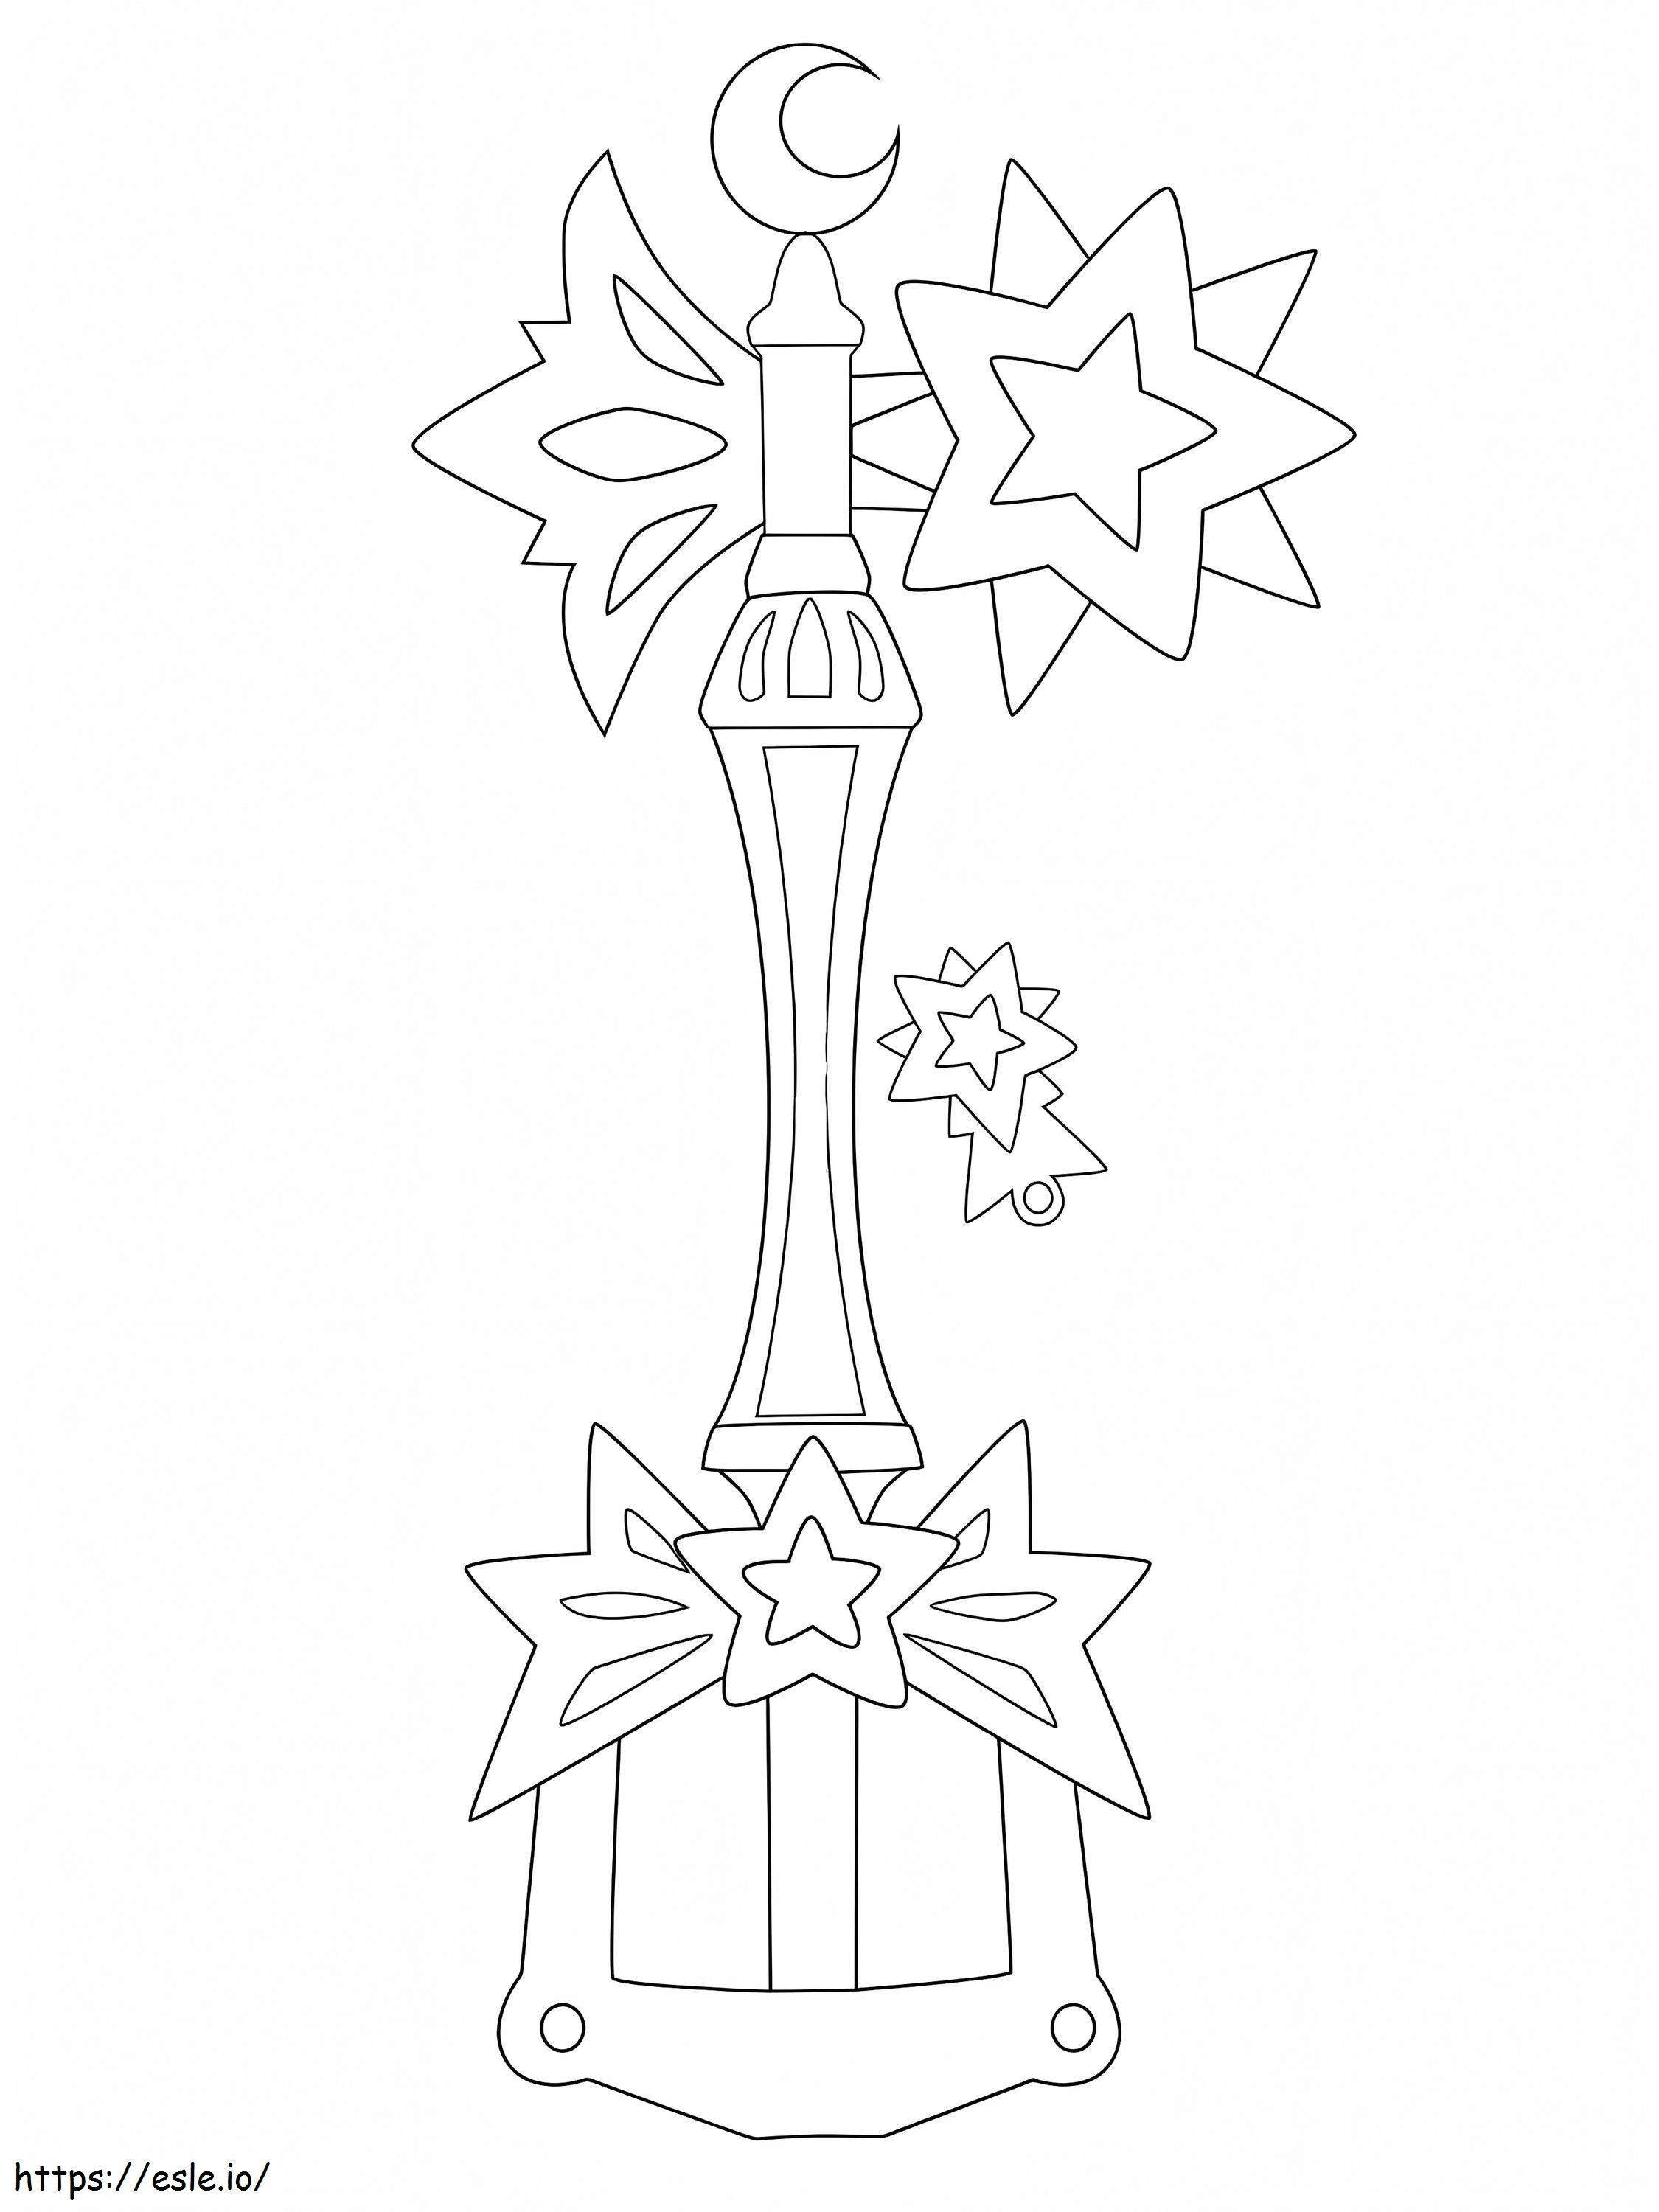 Light Star Key coloring page